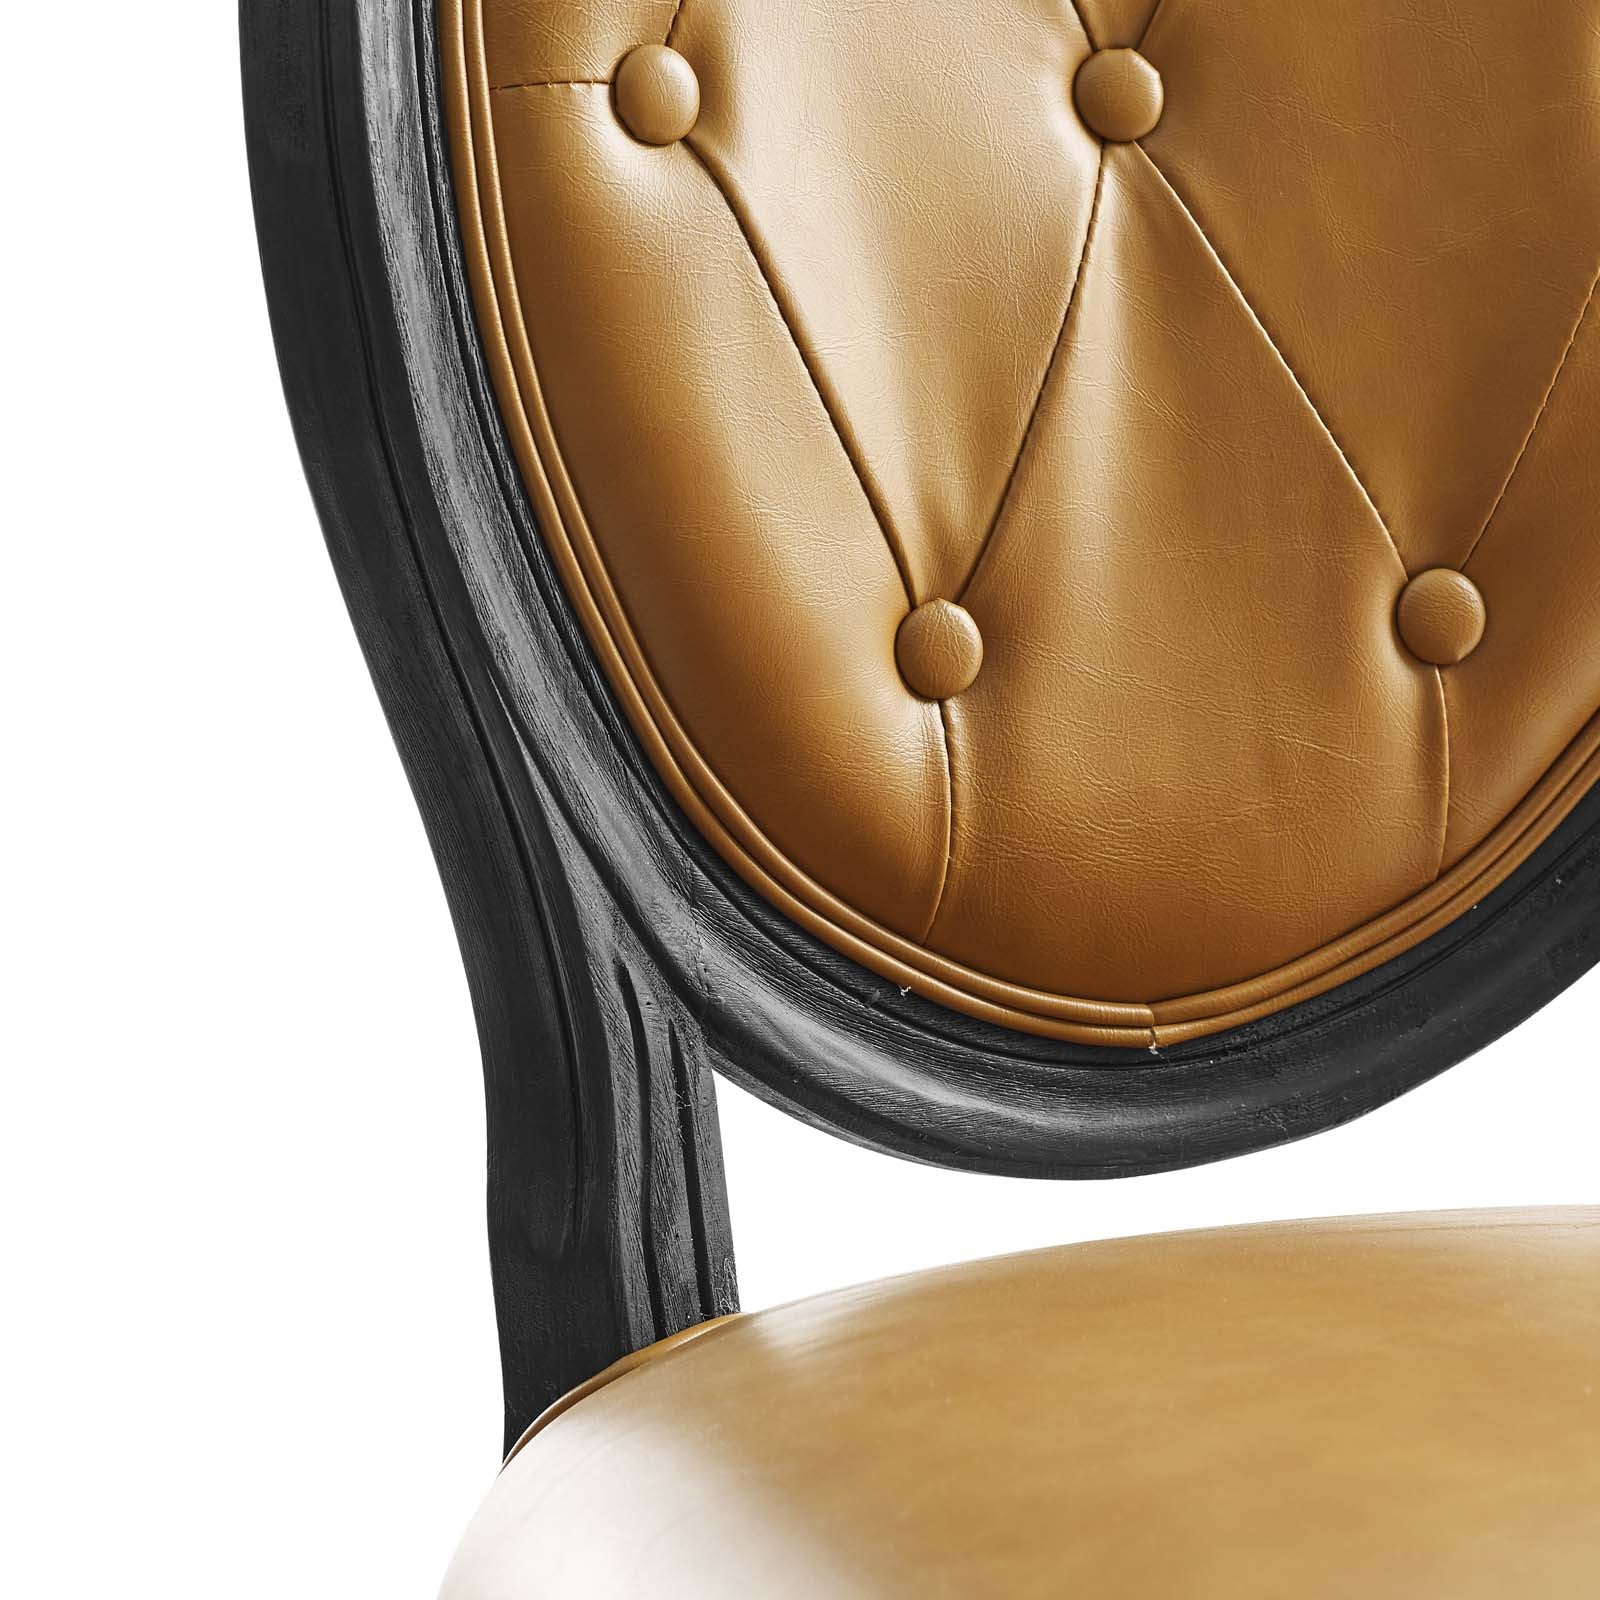 Arise Vintage French Vegan Leather Dining Side Chair